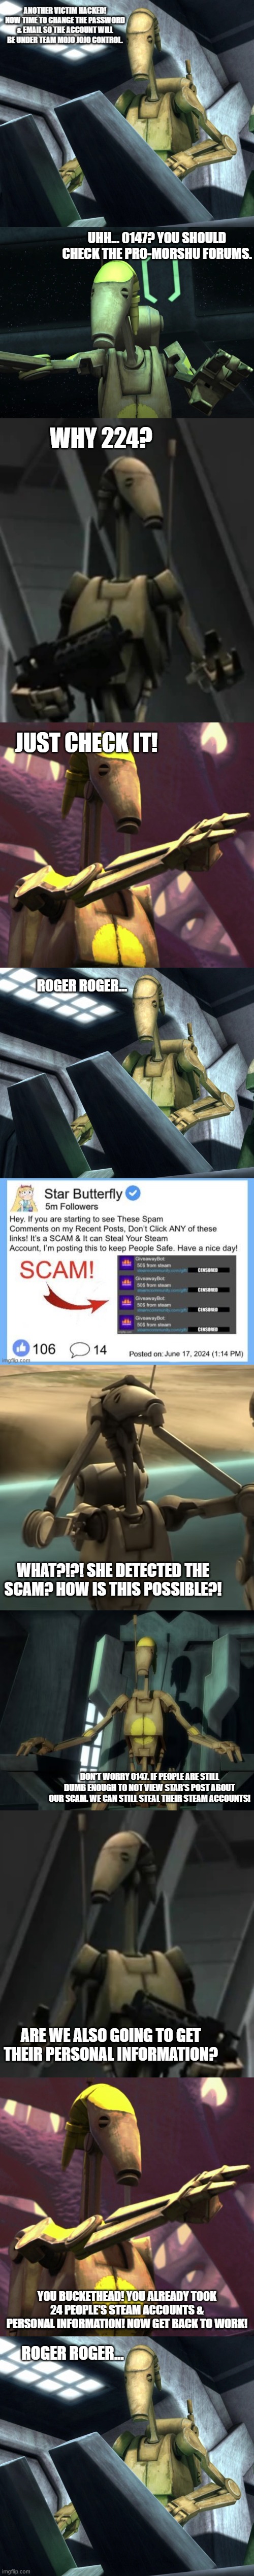 UHH... 0147? YOU SHOULD CHECK THE PRO-MORSHU FORUMS. WHY 224? JUST CHECK IT! ROGER ROGER... WHAT?!?! SHE DETECTED THE SCAM? HOW IS THIS POSSIBLE?! DON'T WORRY 0147. IF PEOPLE ARE STILL DUMB ENOUGH TO NOT VIEW STAR'S POST ABOUT OUR SCAM. WE CAN STILL STEAL THEIR STEAM ACCOUNTS! ARE WE ALSO GOING TO GET THEIR PERSONAL INFORMATION? YOU BUCKETHEAD! YOU ALREADY TOOK 24 PEOPLE'S STEAM ACCOUNTS & PERSONAL INFORMATION! NOW GET BACK TO WORK! ROGER ROGER... | image tagged in battle droid,battle droid advice | made w/ Imgflip meme maker